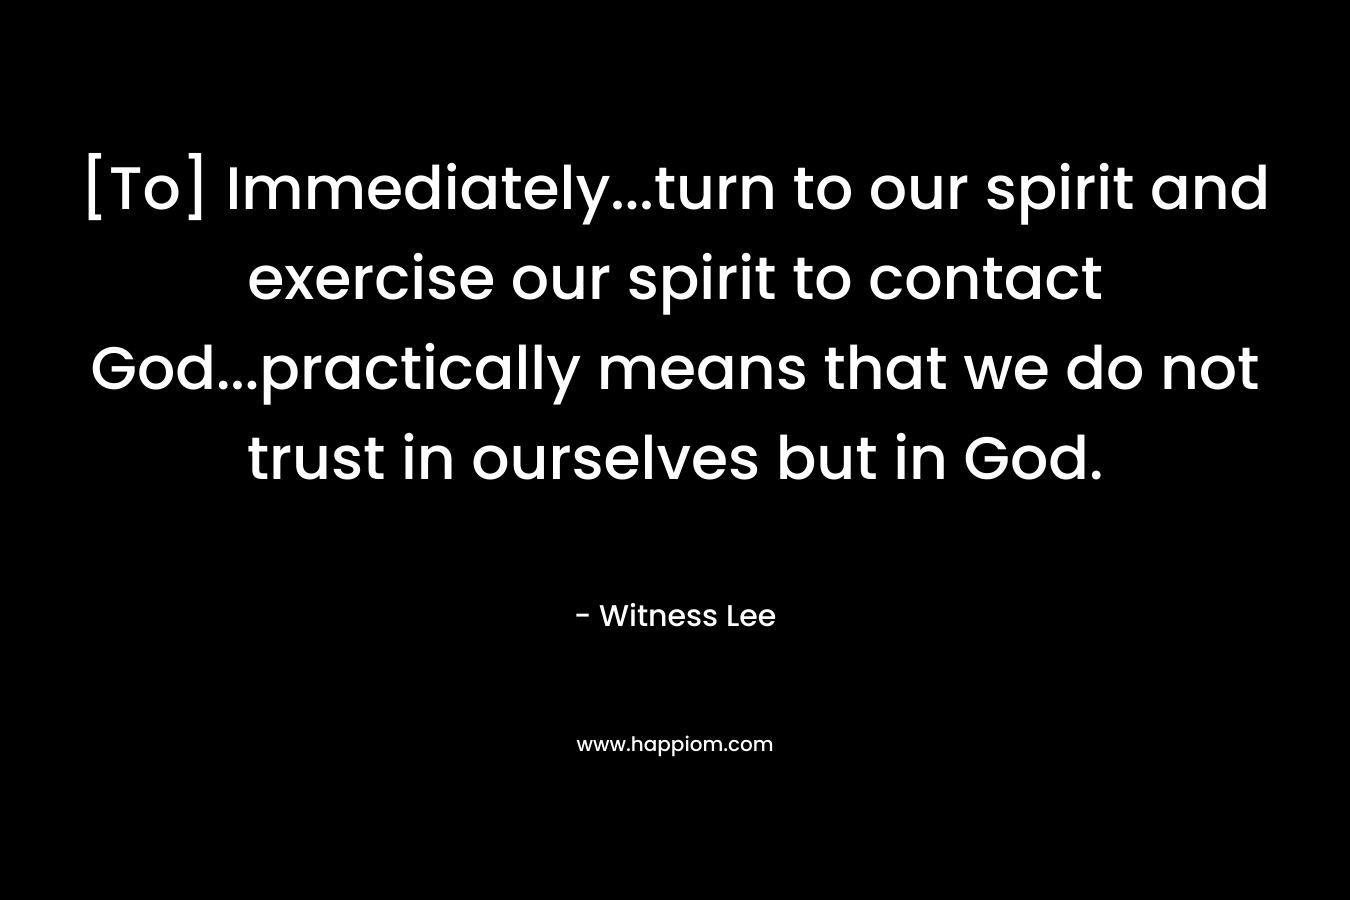 [To] Immediately...turn to our spirit and exercise our spirit to contact God...practically means that we do not trust in ourselves but in God.